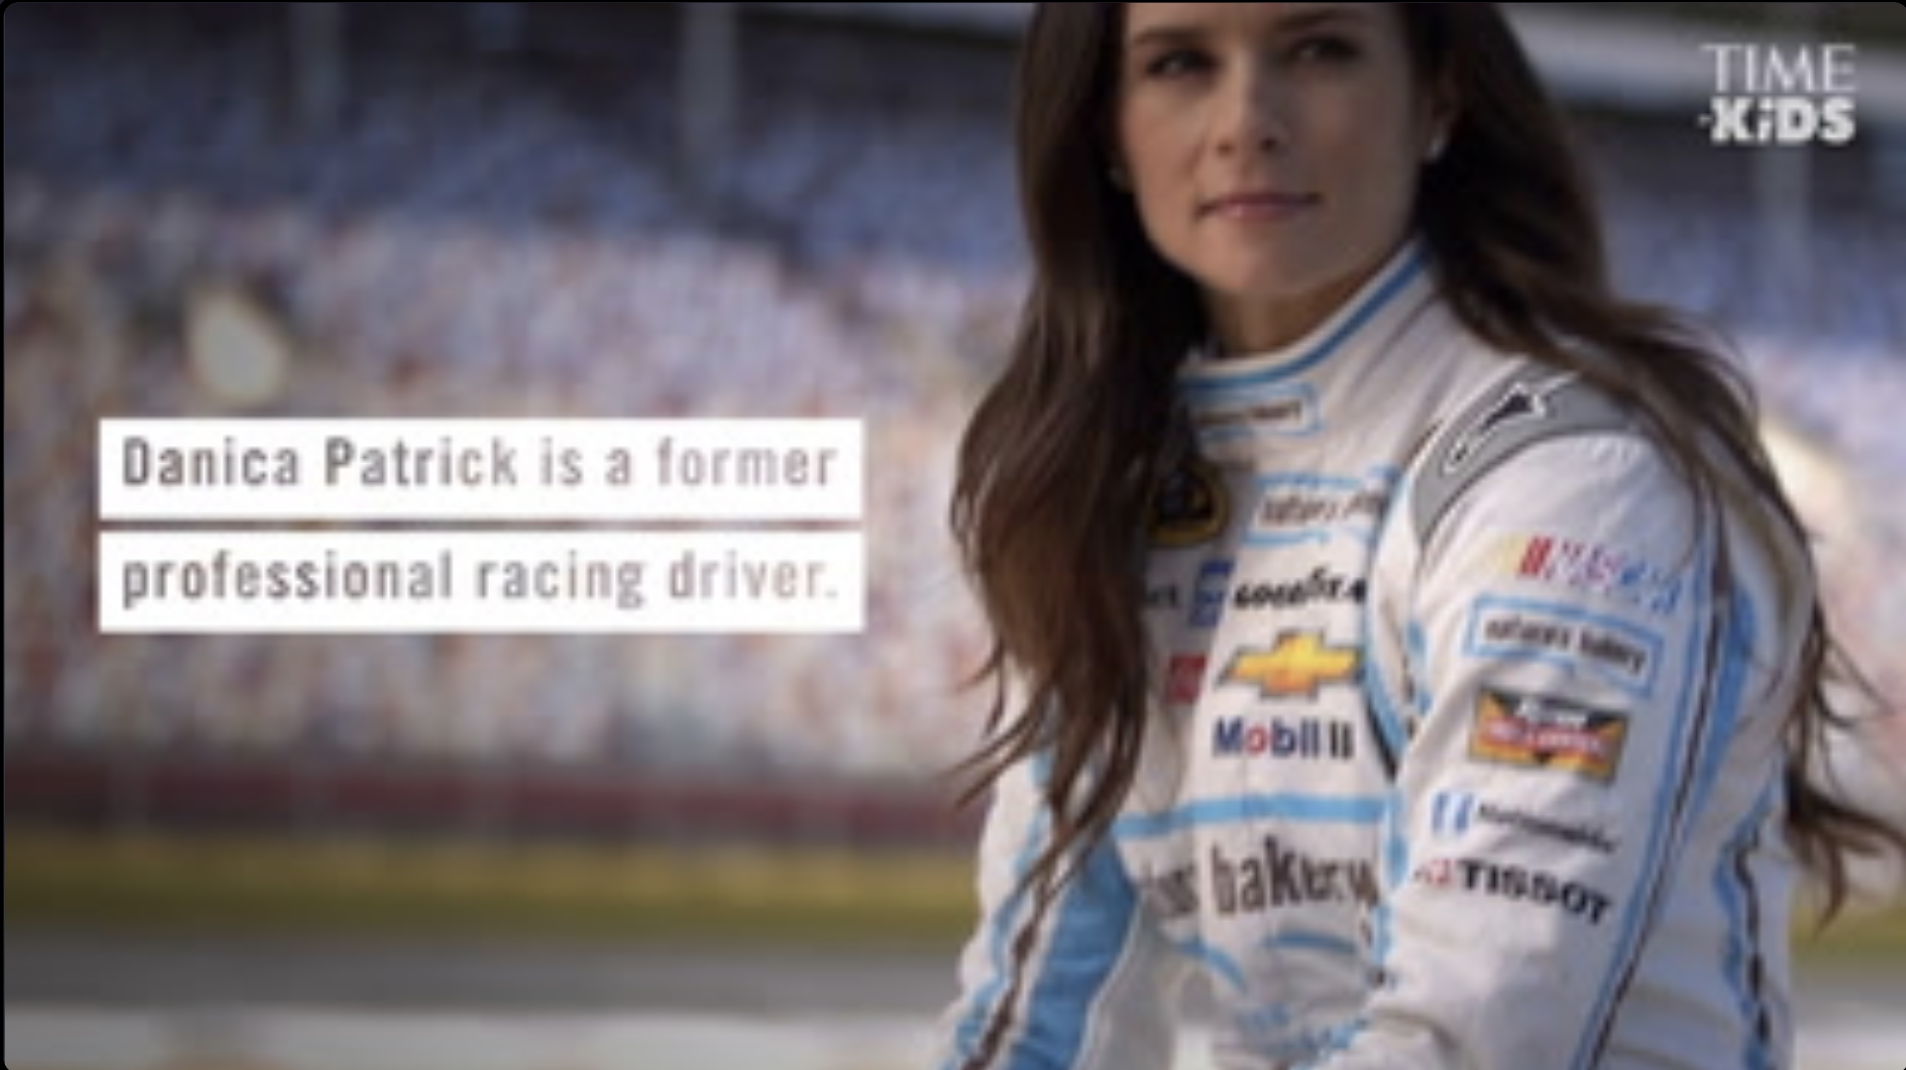 Which race did Danica Patrick win to become the first woman to lead laps and score points in the NASCAR Cup Series?